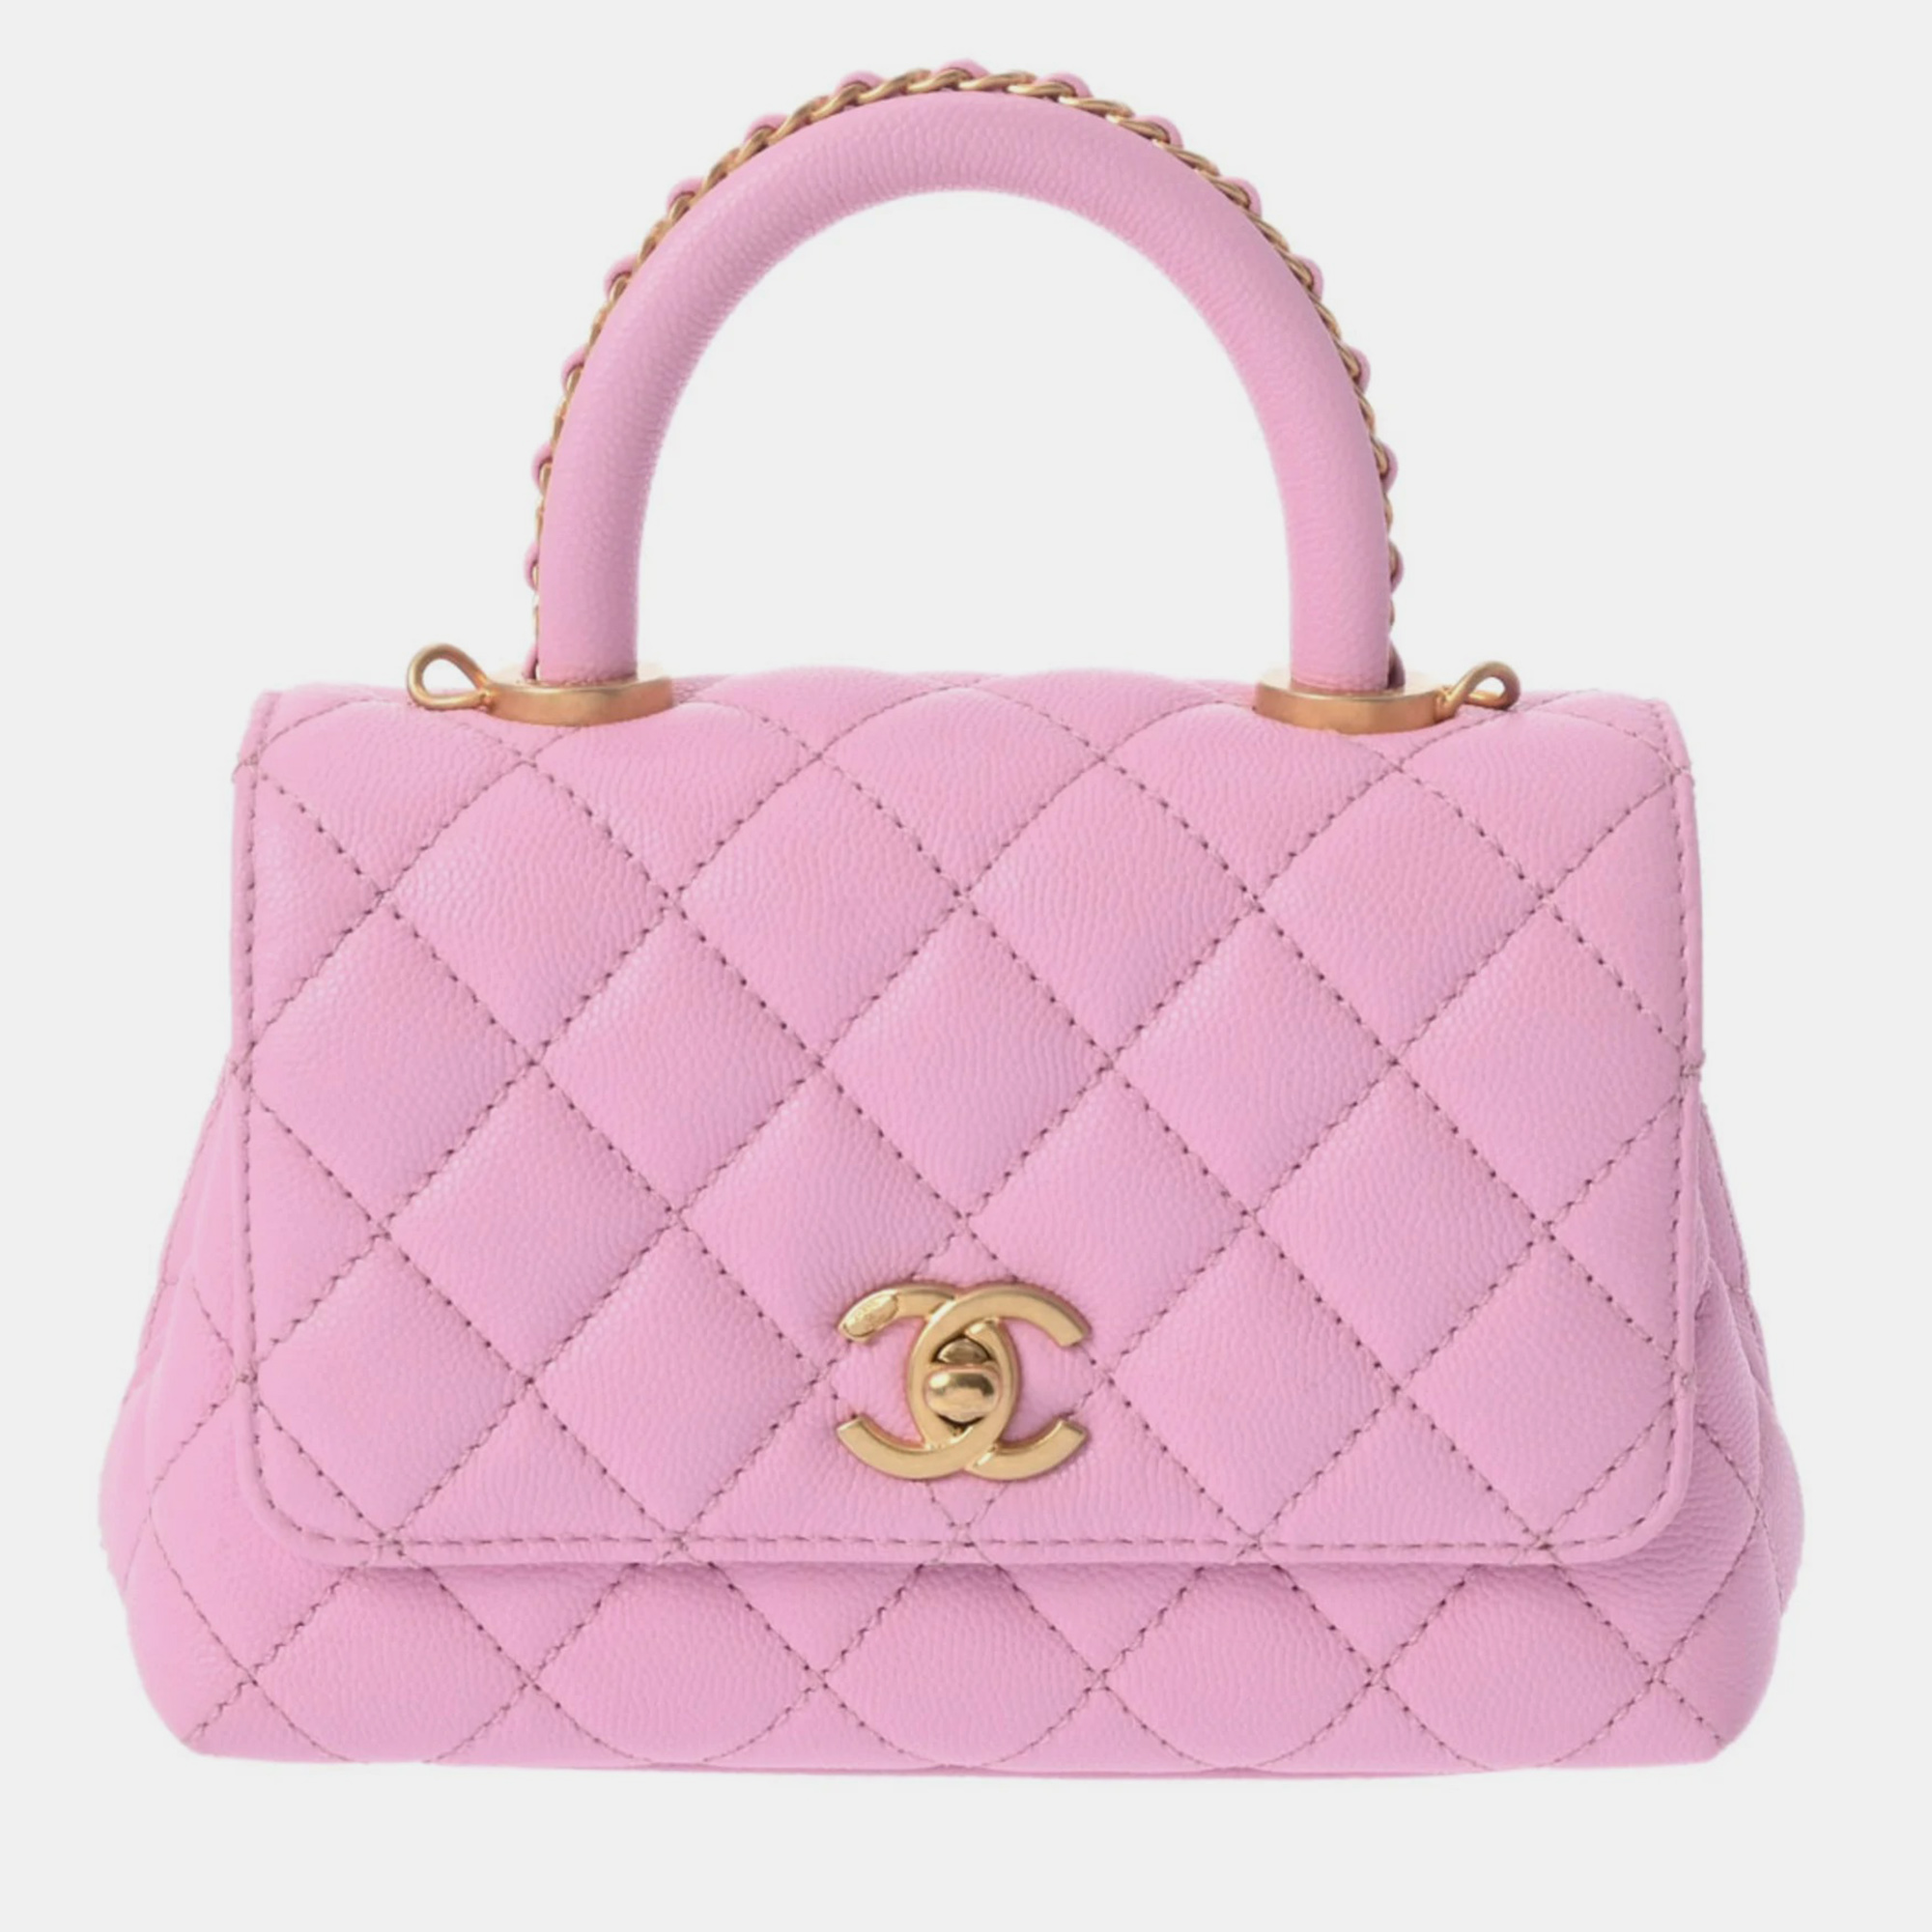 Chanel pink leather xs coco handle top handle bags